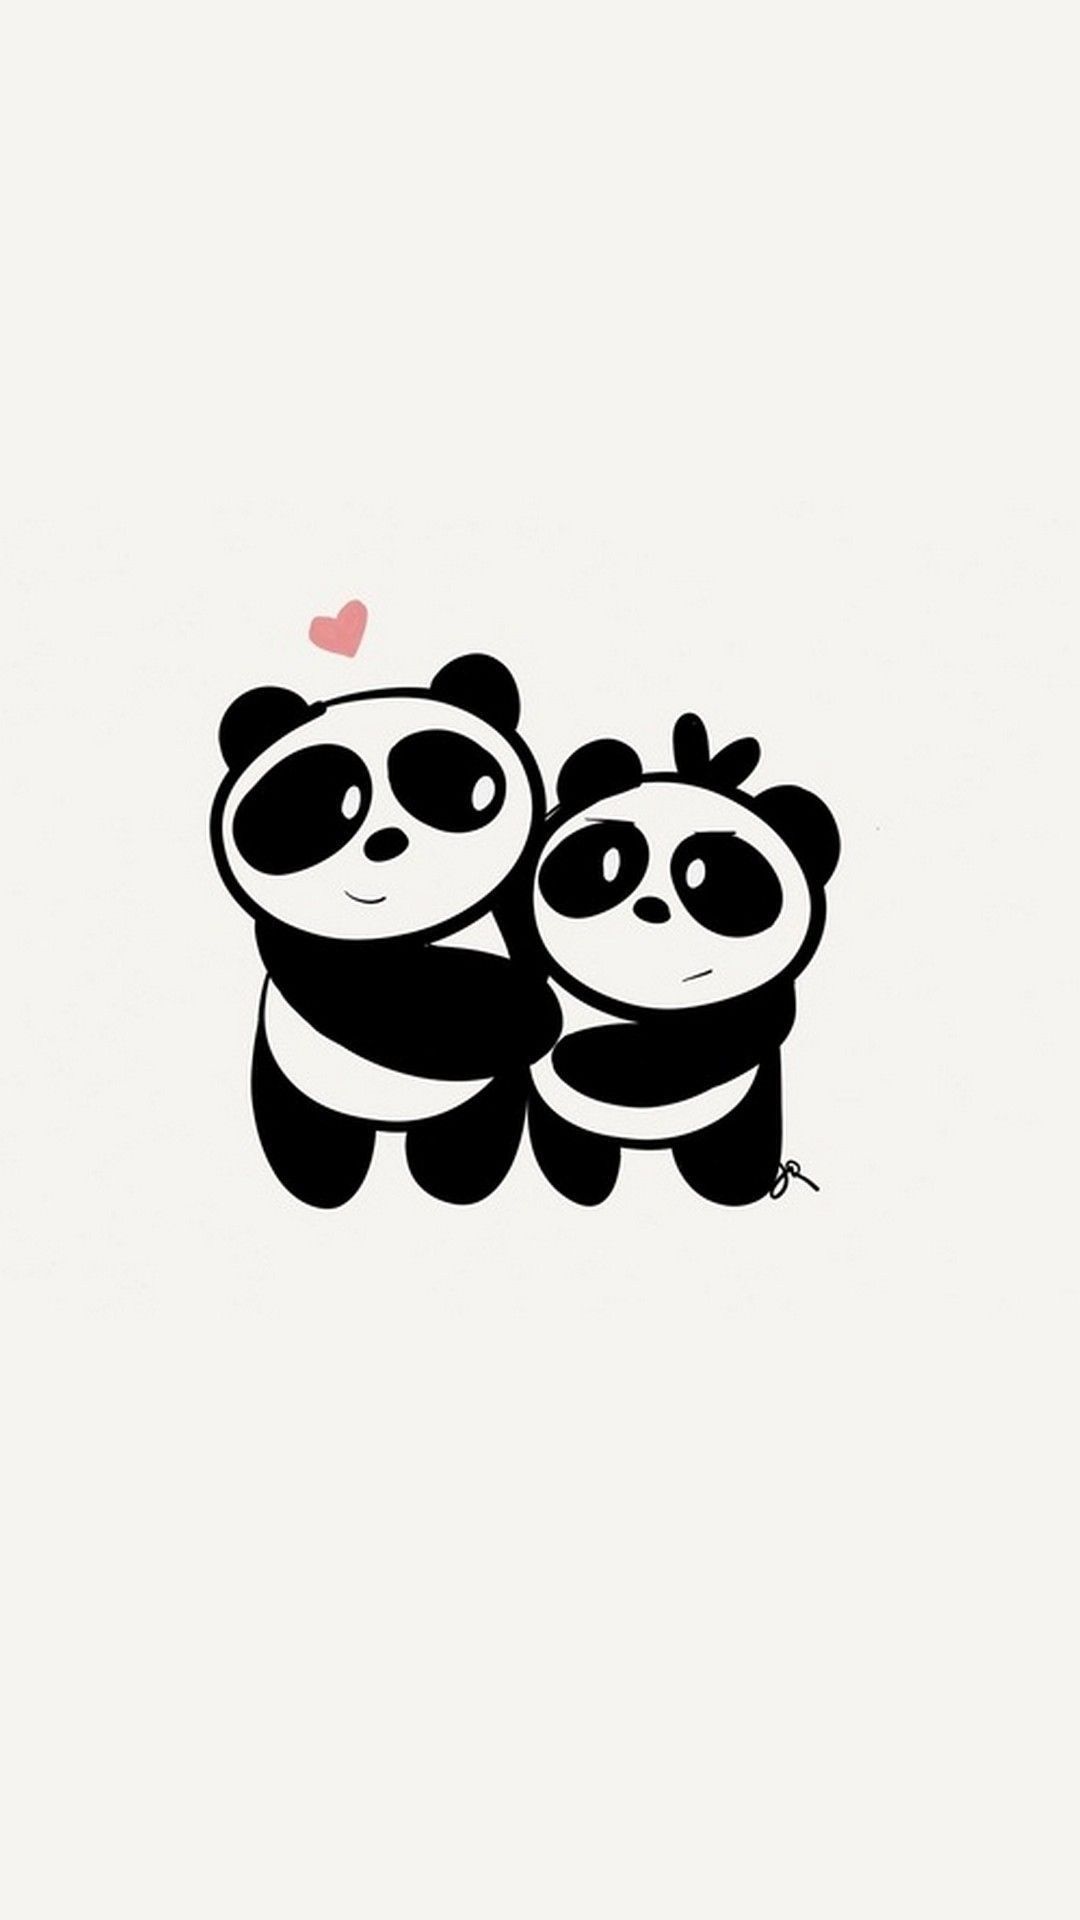 Beautiful iPhone X Wallpaper Black and White Awesome iPhone X Cute Couple Of Elegant White Pan. Cute panda wallpaper, Wallpaper iphone cute, Cute couple wallpaper